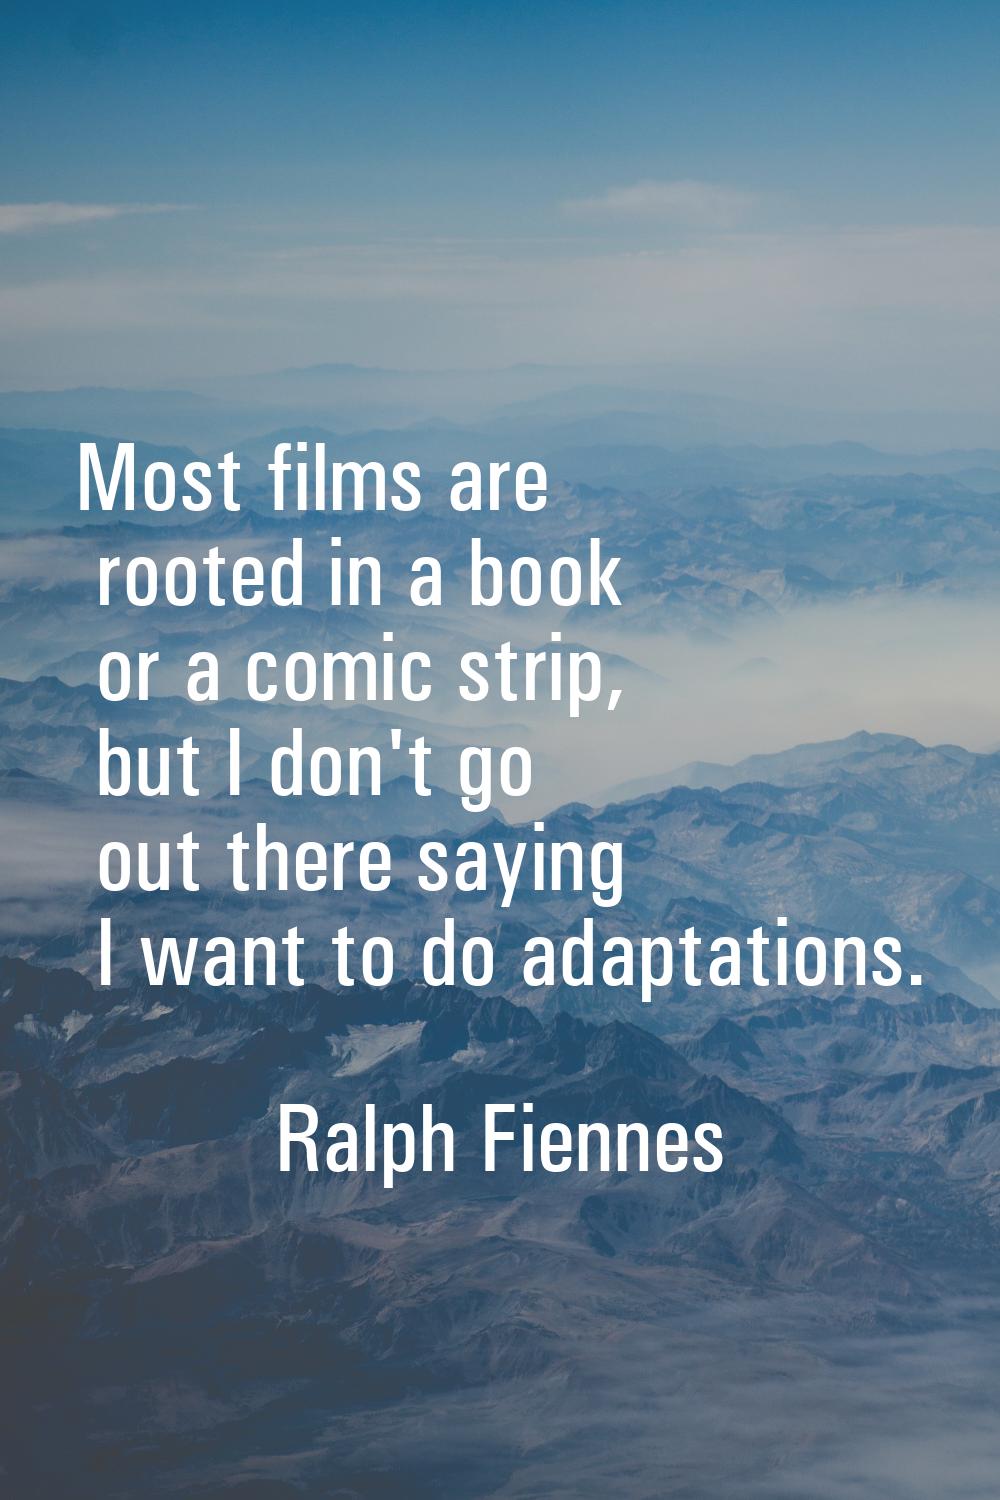 Most films are rooted in a book or a comic strip, but I don't go out there saying I want to do adap